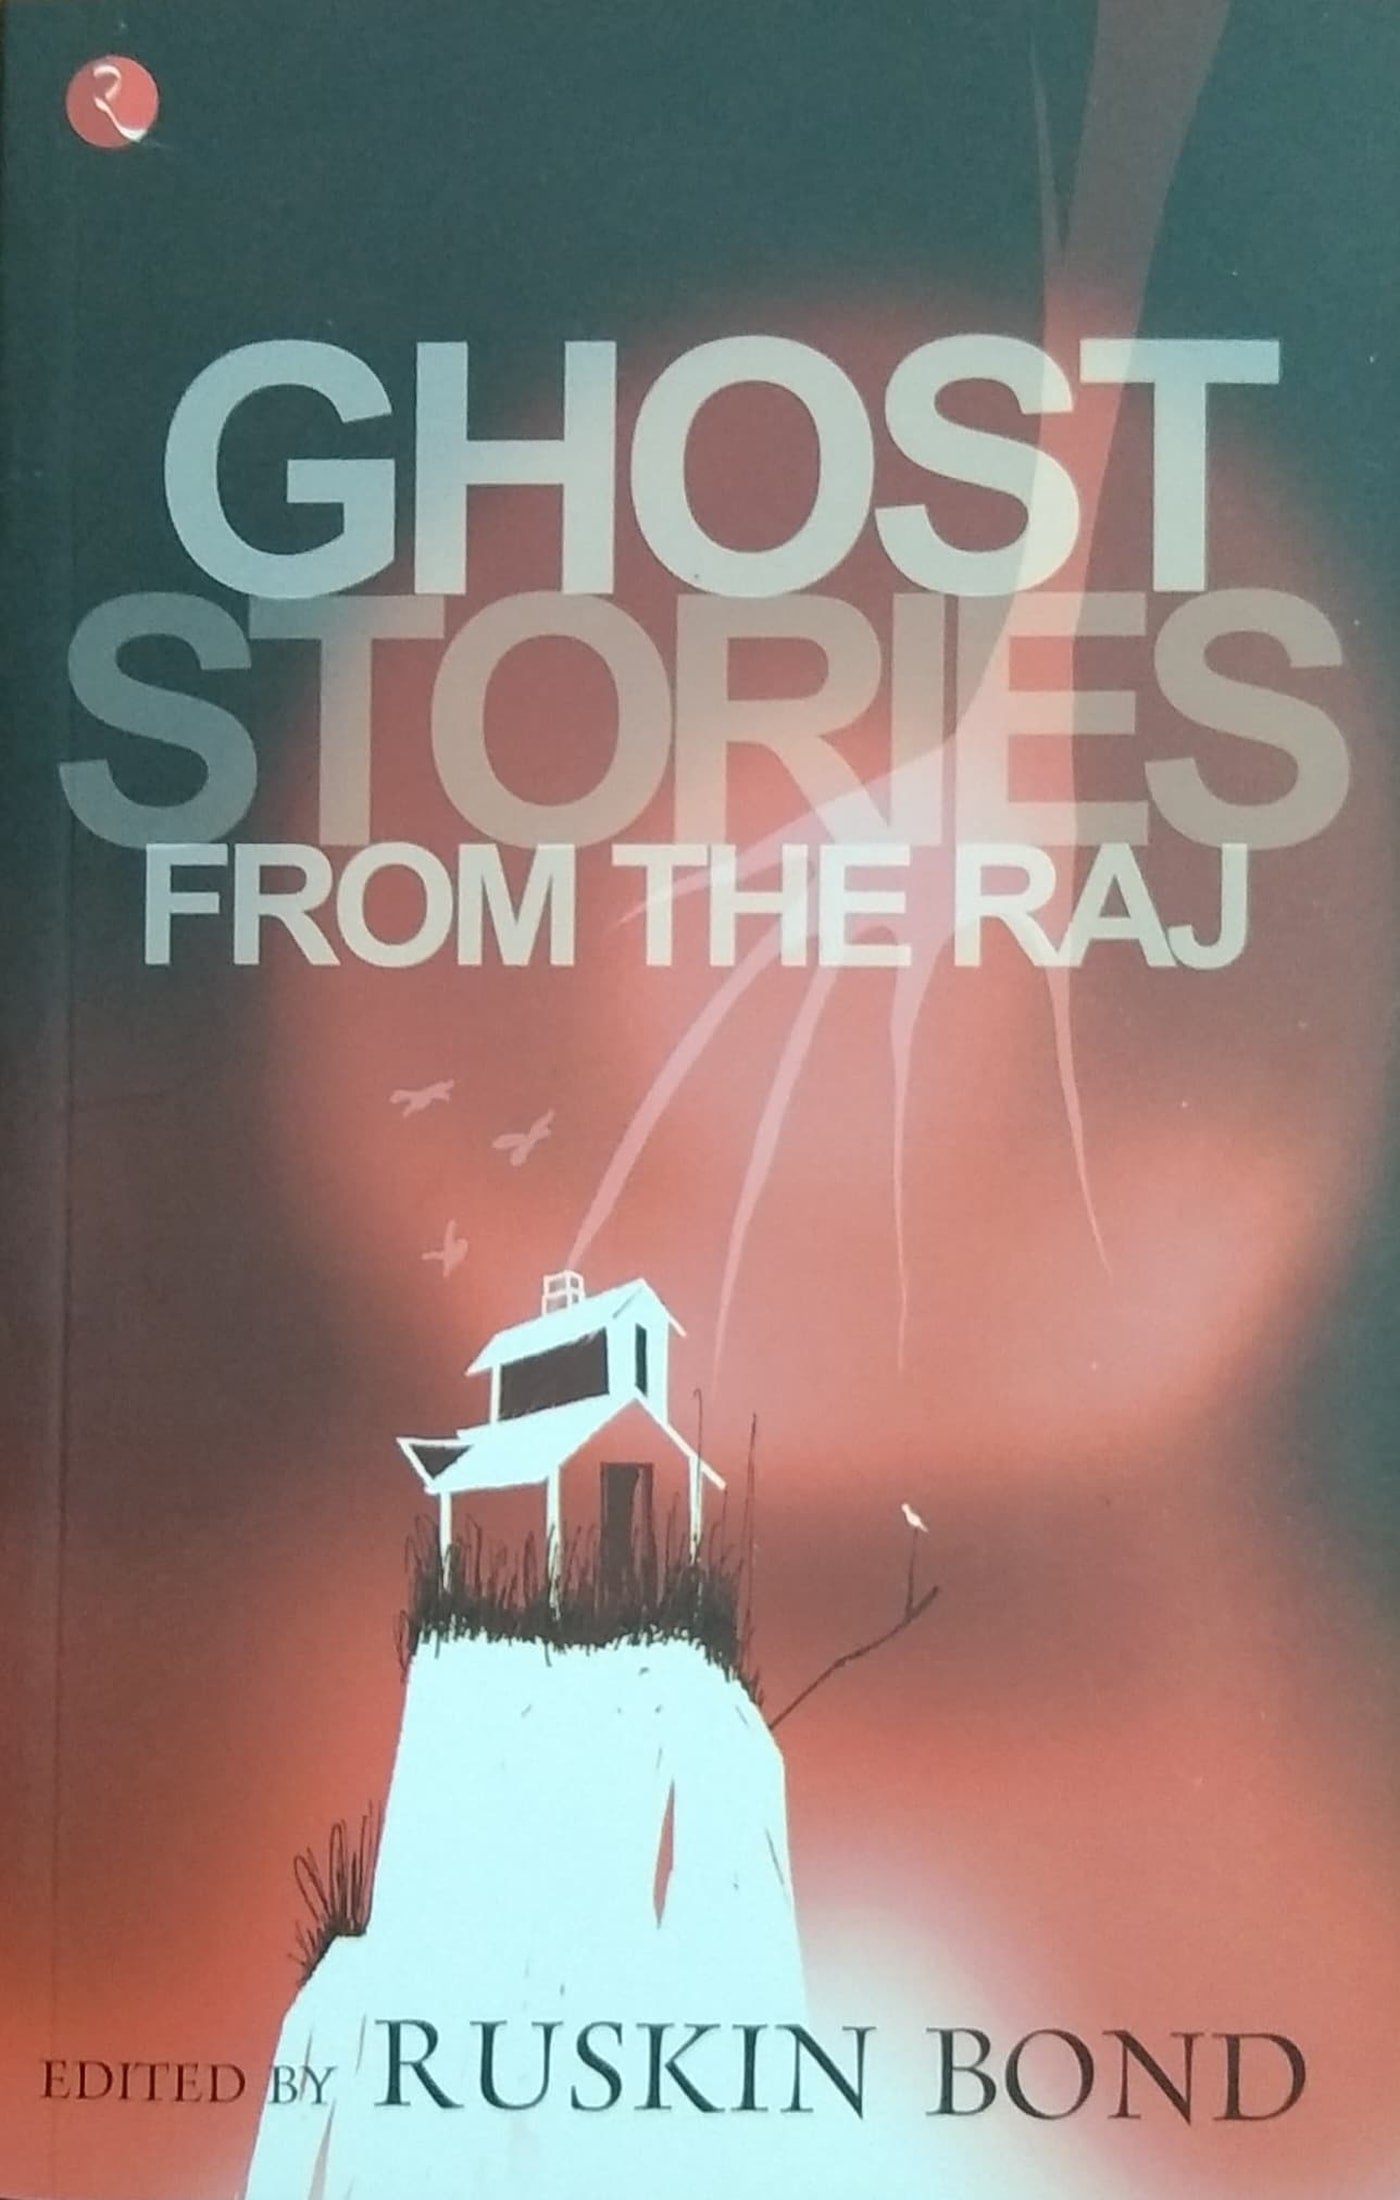 Ruskin Bond - Ghost Stories from the Raj